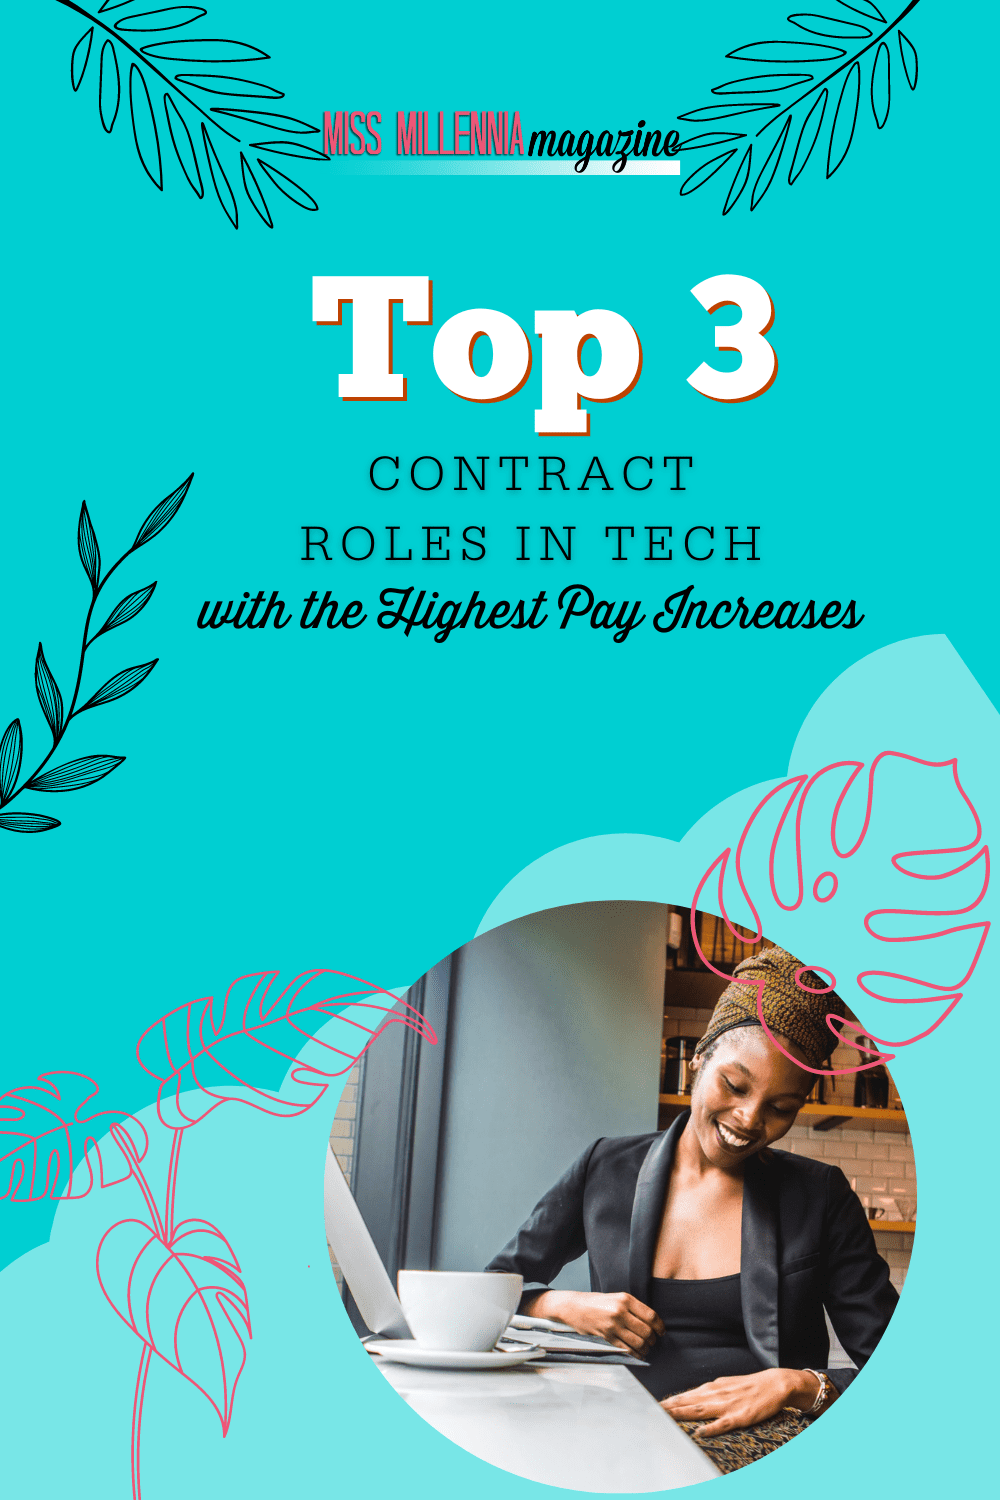 Top 3 Contract Roles in Tech with the Highest Pay Increases